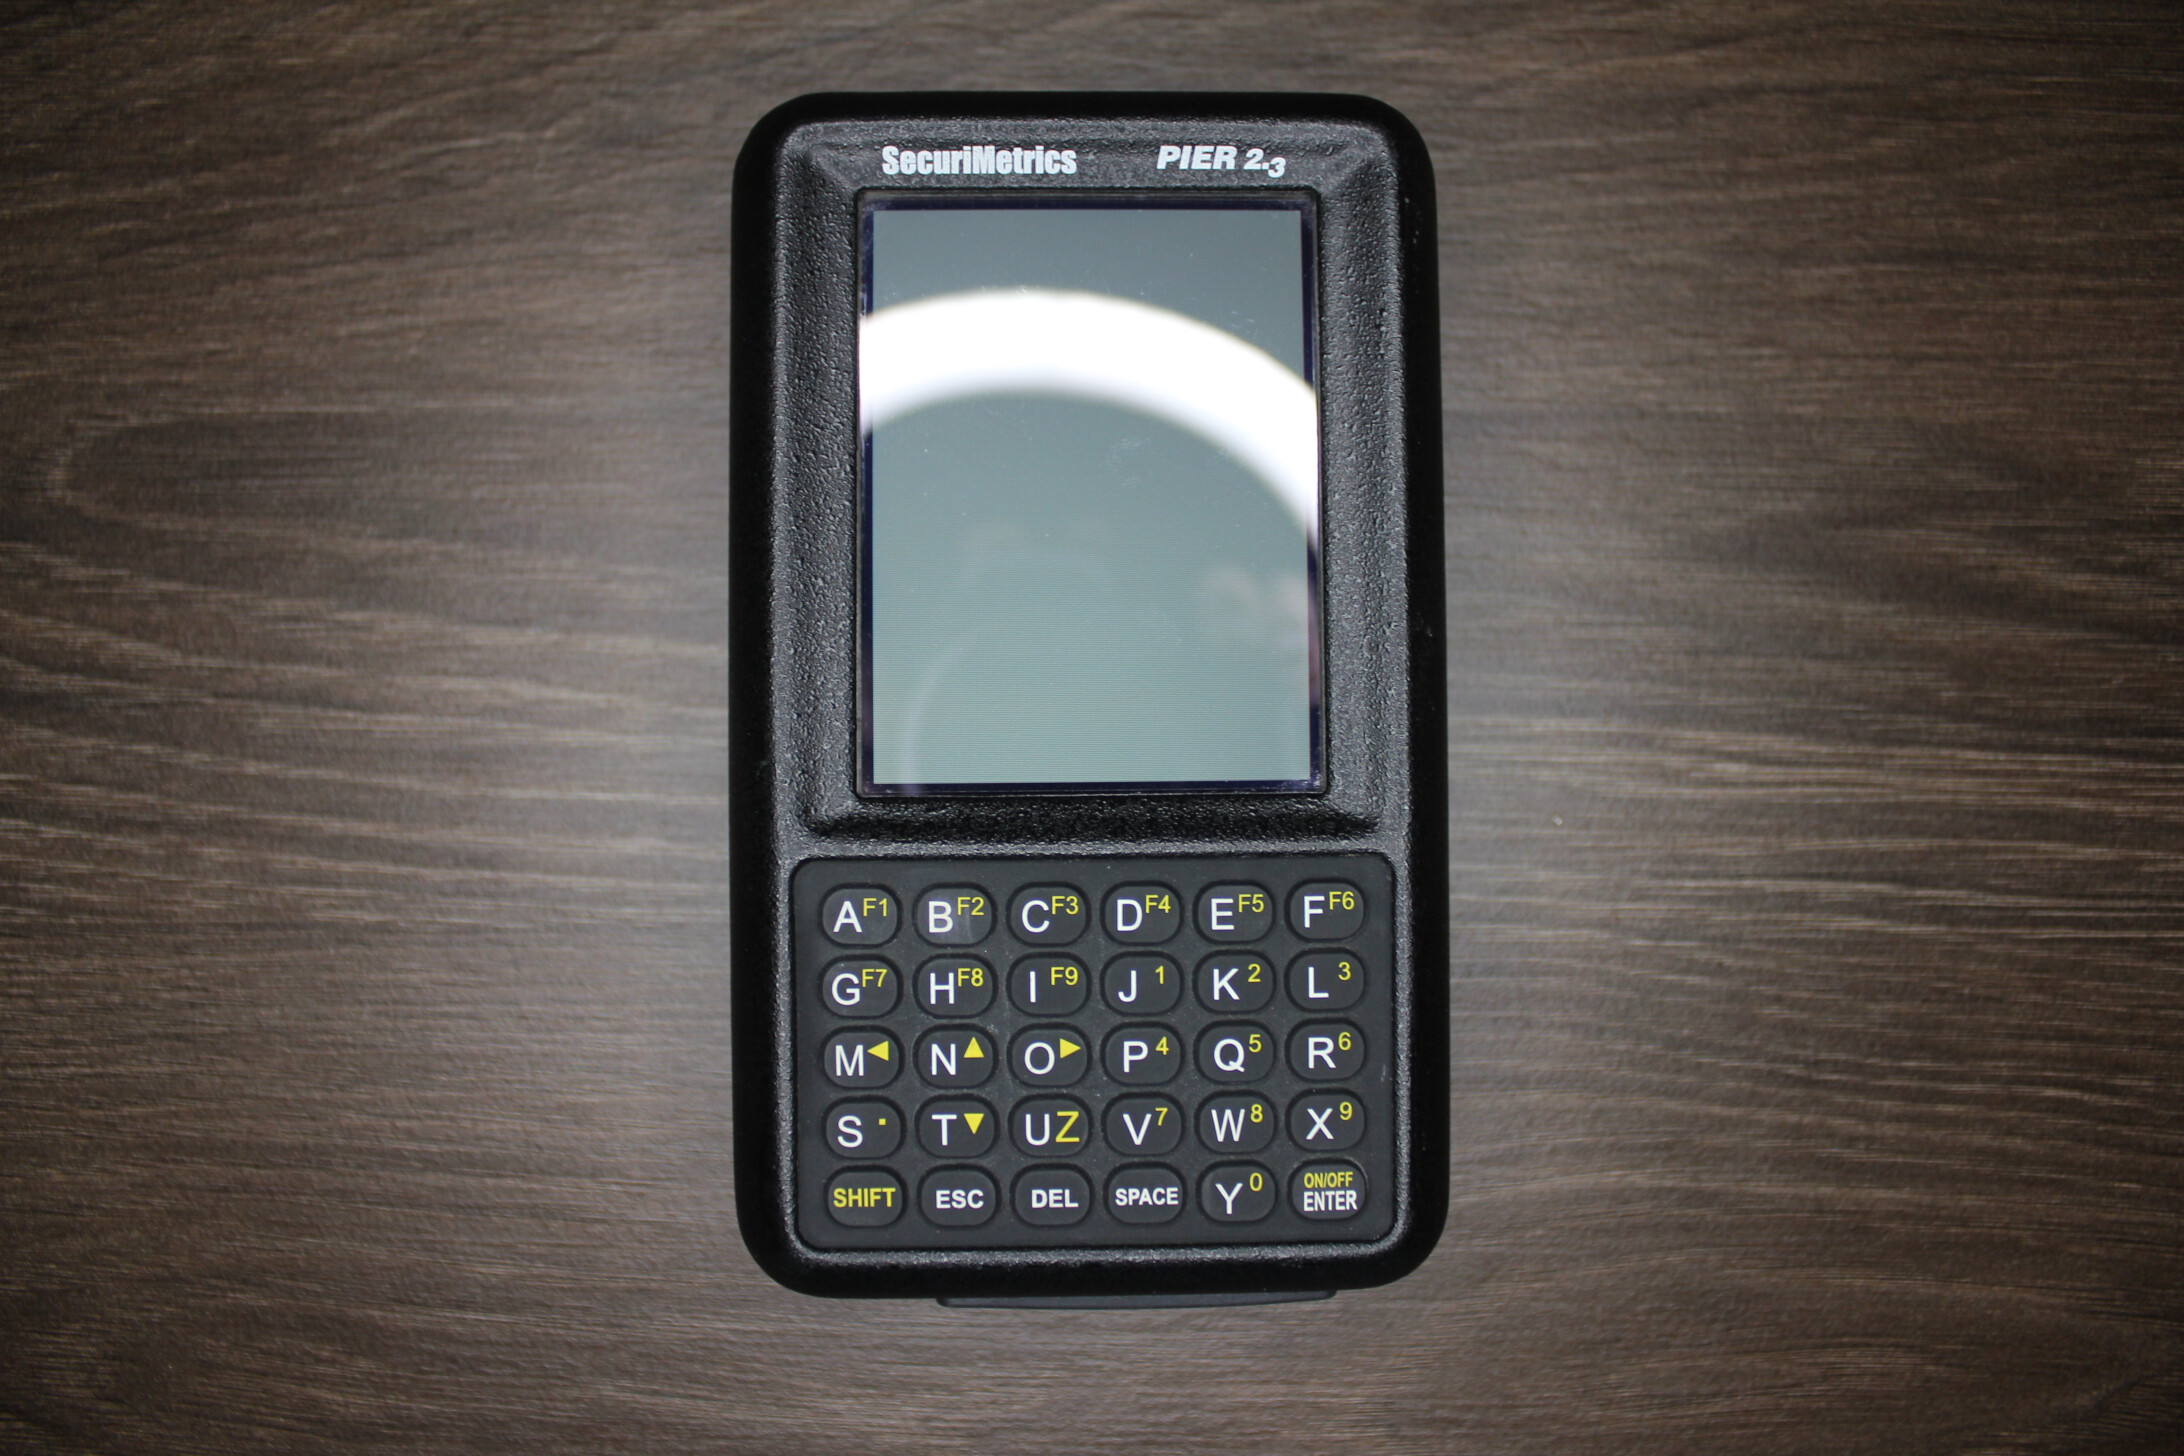 Front of the device